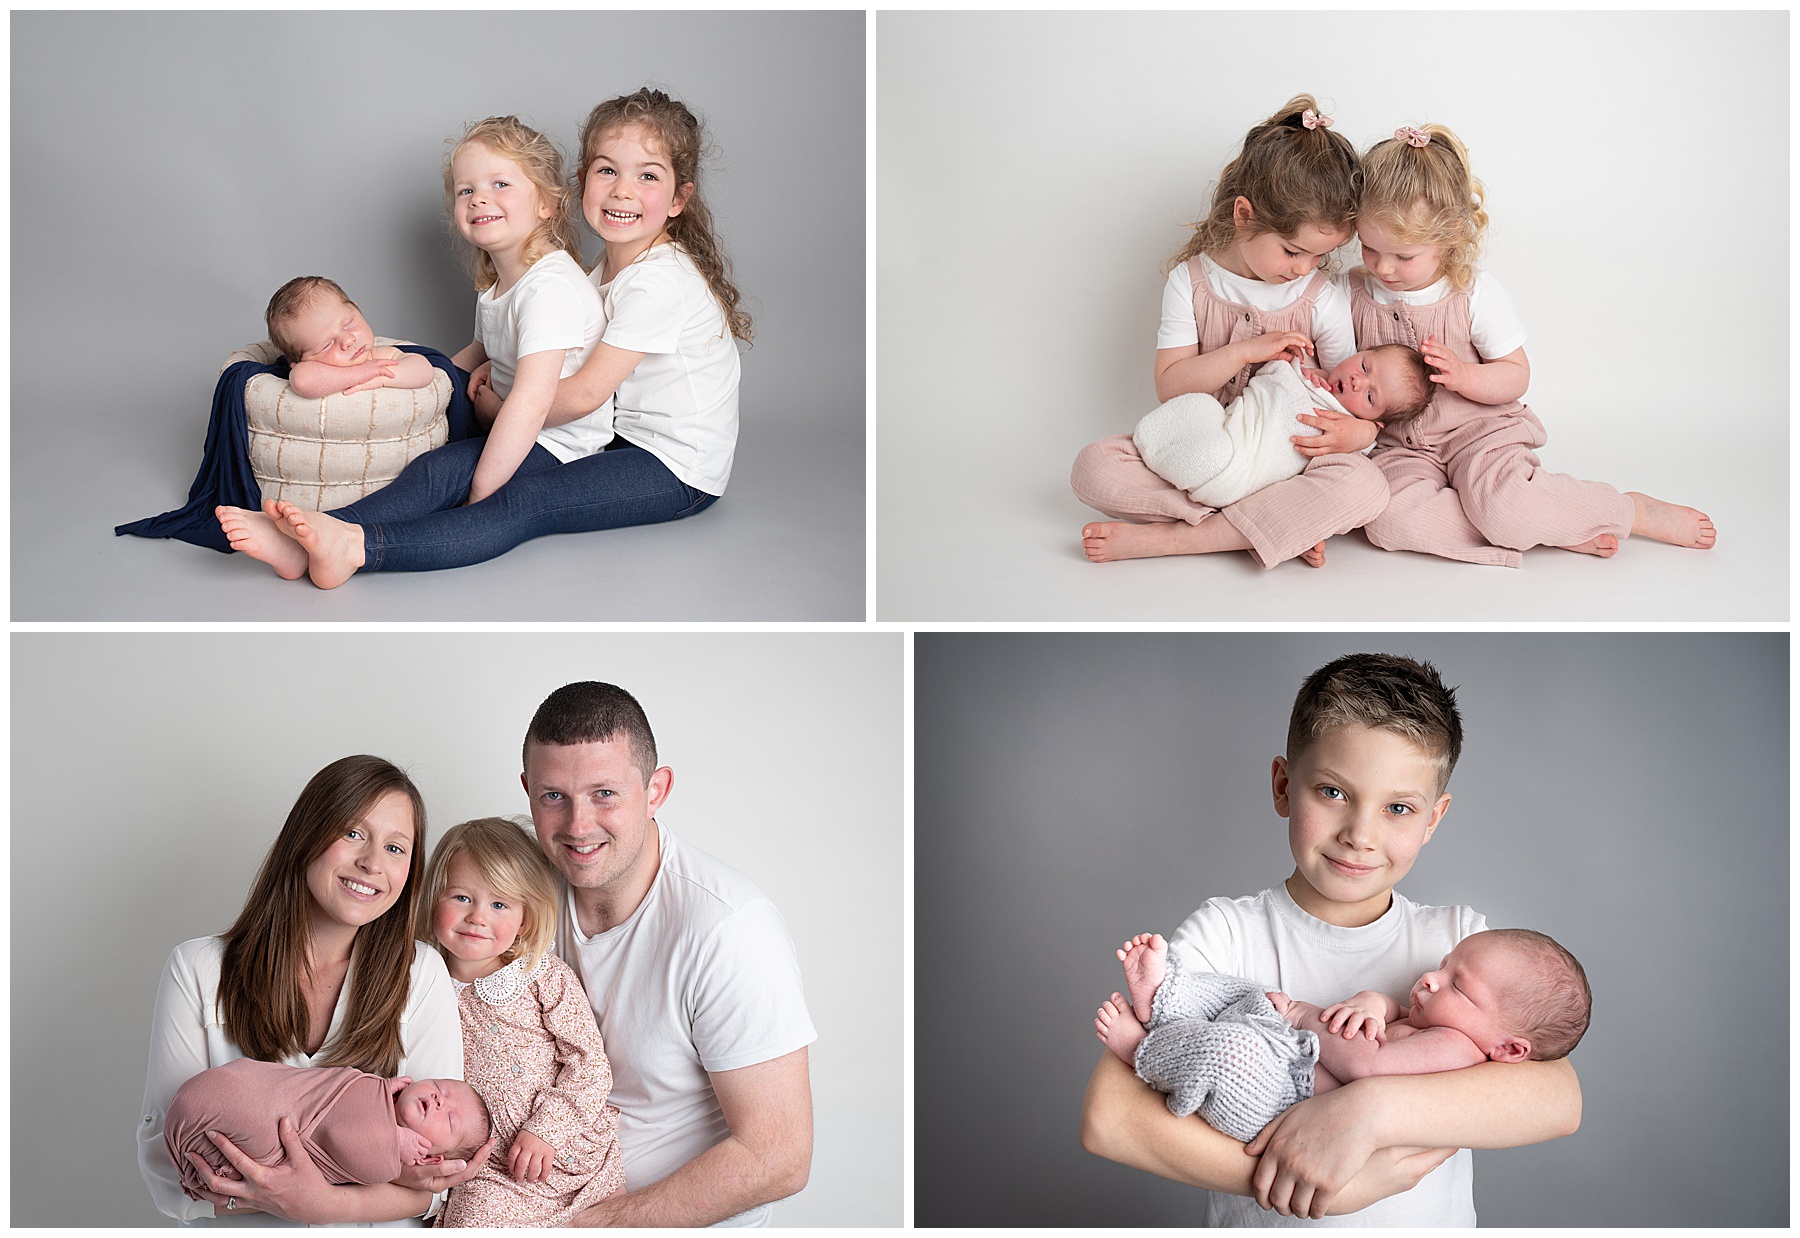 I love capturing the bond between parents, little siblings and the latest addition to the family.